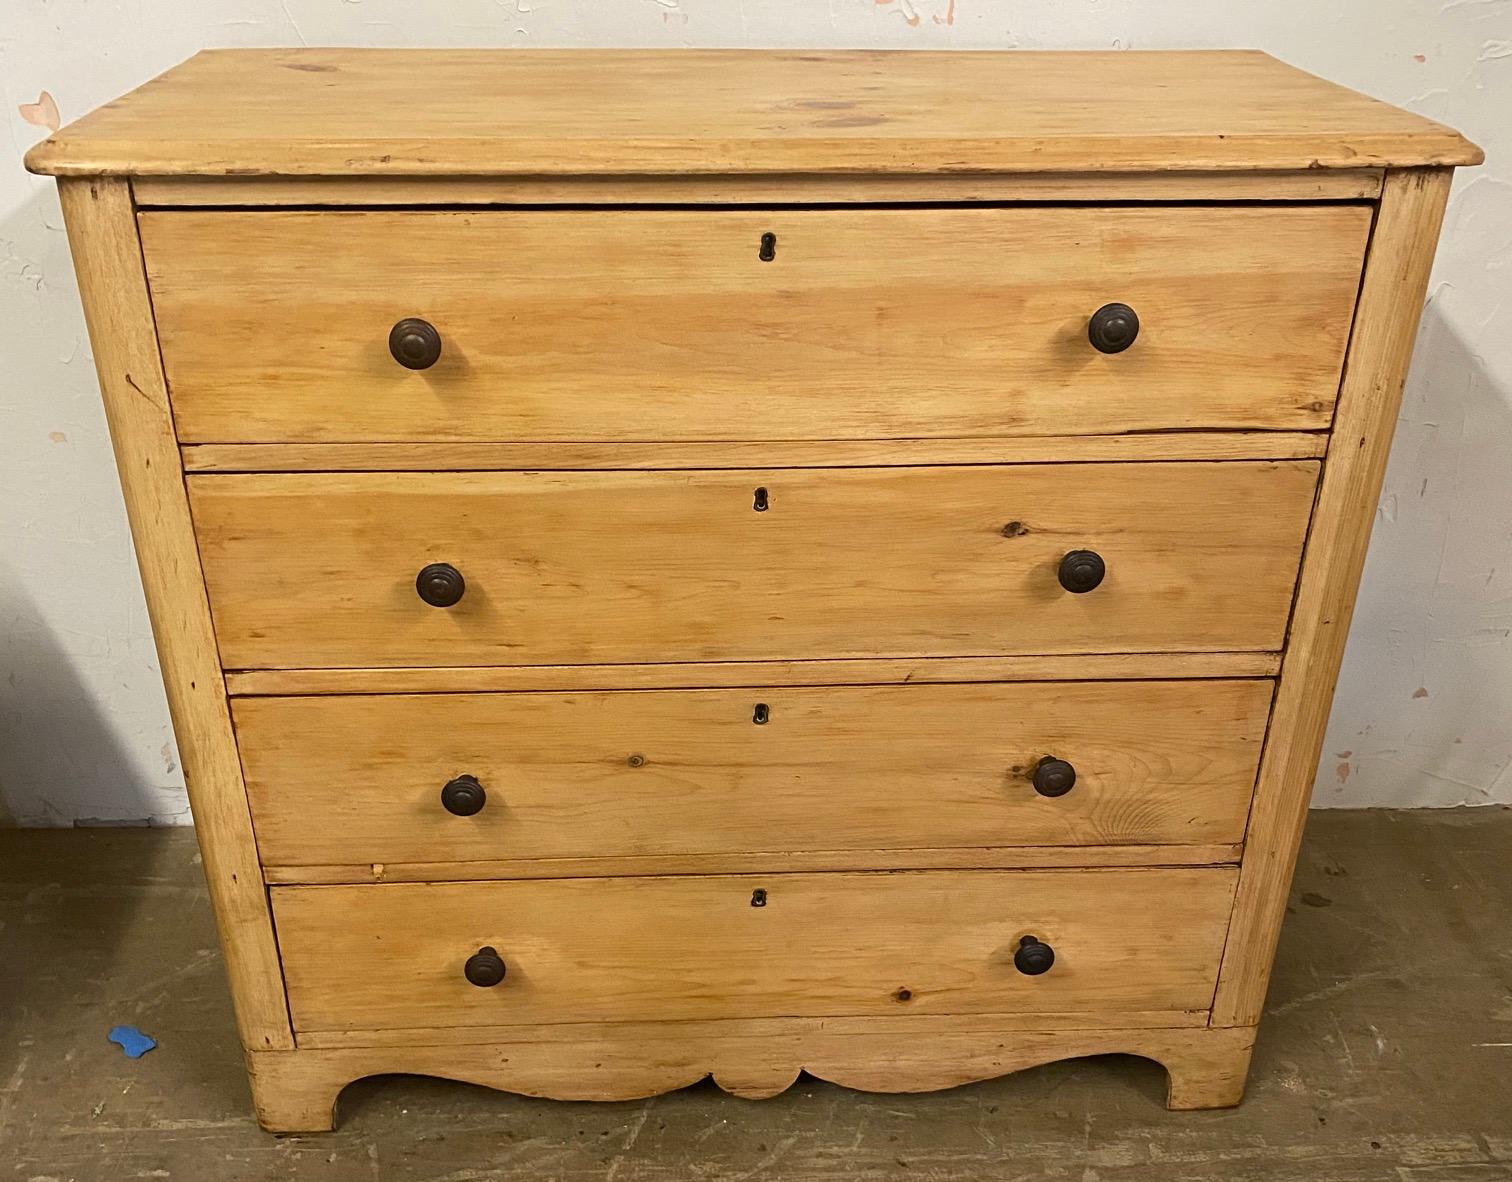 This antique American pine chest with four generous dovetailed drawers fitted with iron pulls and scalloped valance apron at the base, brings a touch of rustic elegance to any bedroom or living room. If you are looking for a Gustavian, George III,